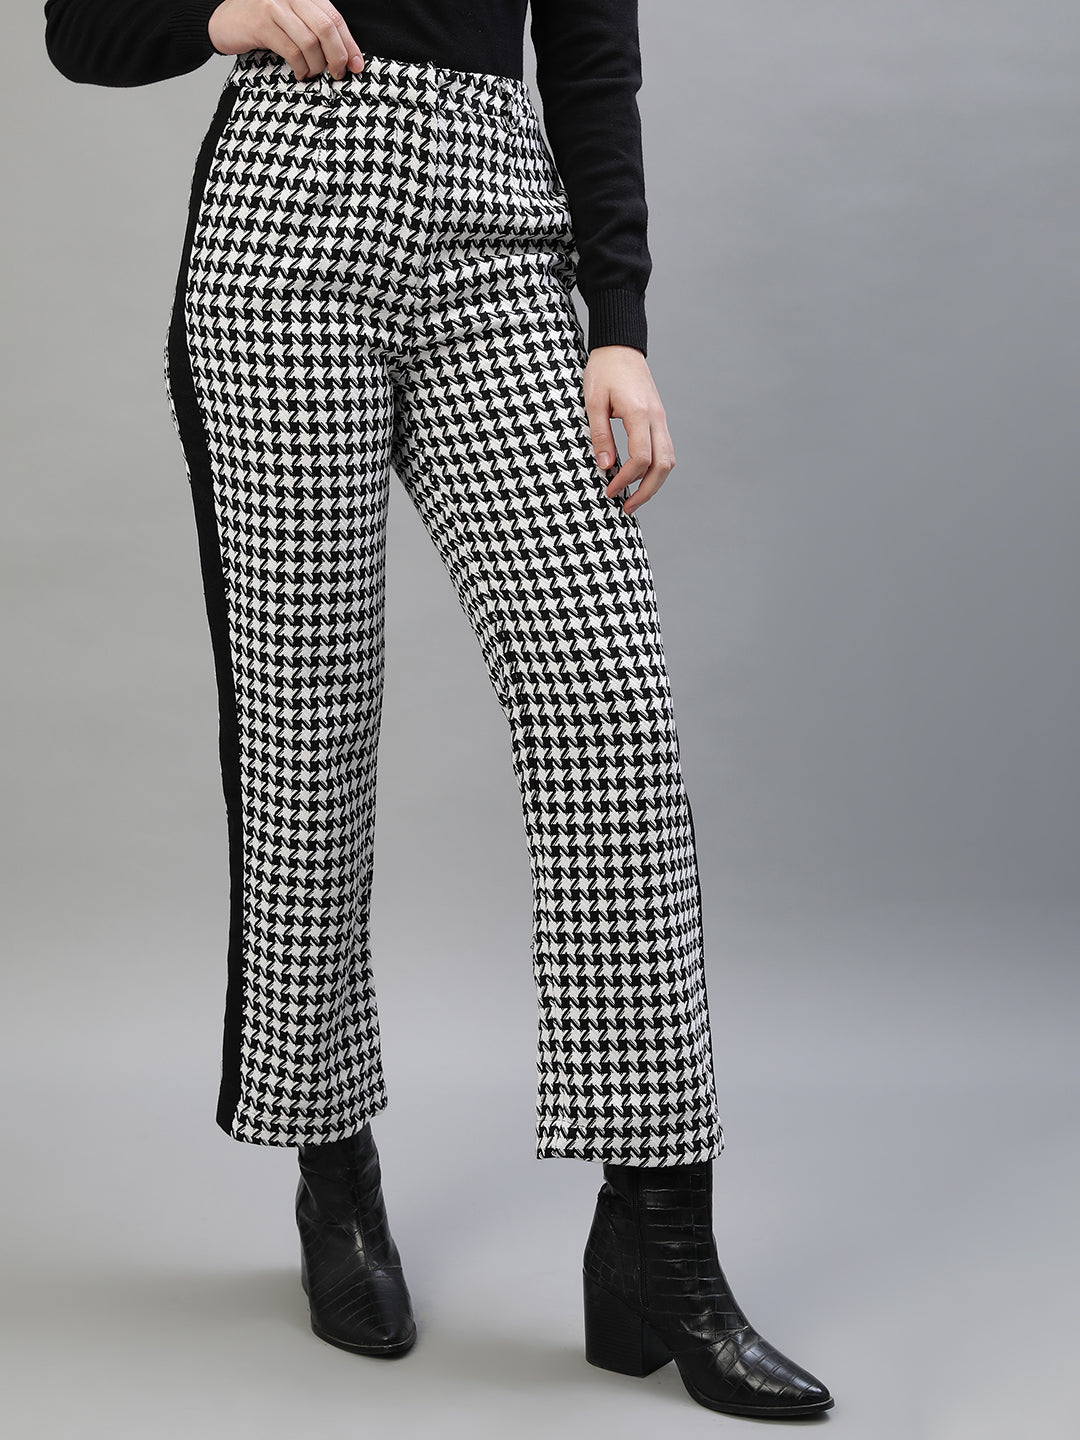 Buy High Star Women Blue Check Trousers online